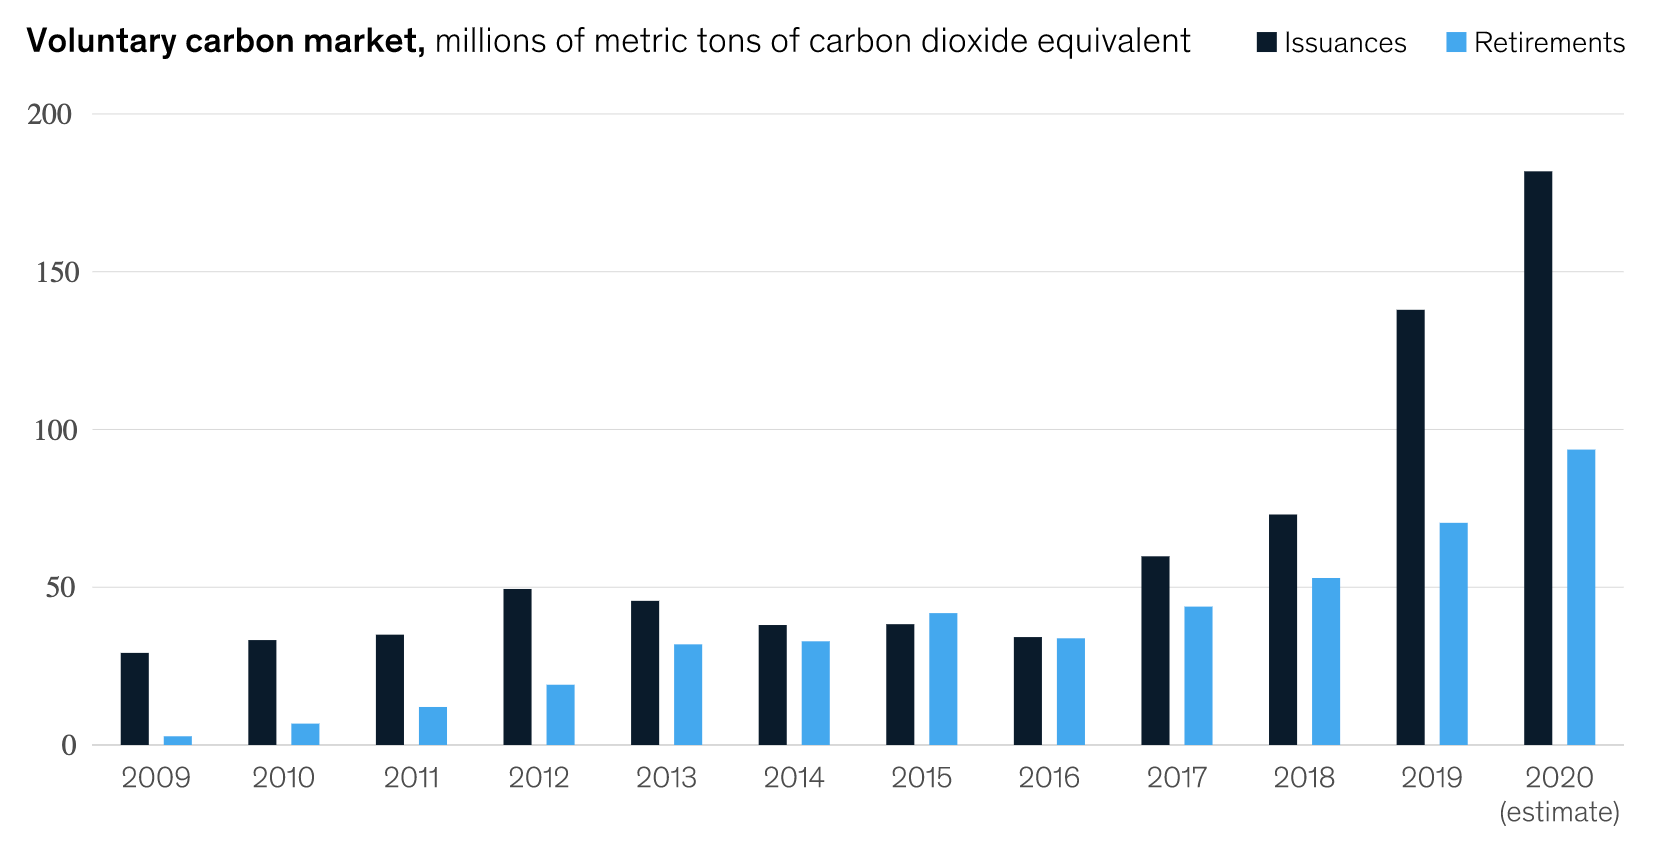 Source: https://www.mckinsey.com/business-functions/sustainability/our-insights/how-the-voluntary-carbon-market-can-help-address-climate-change